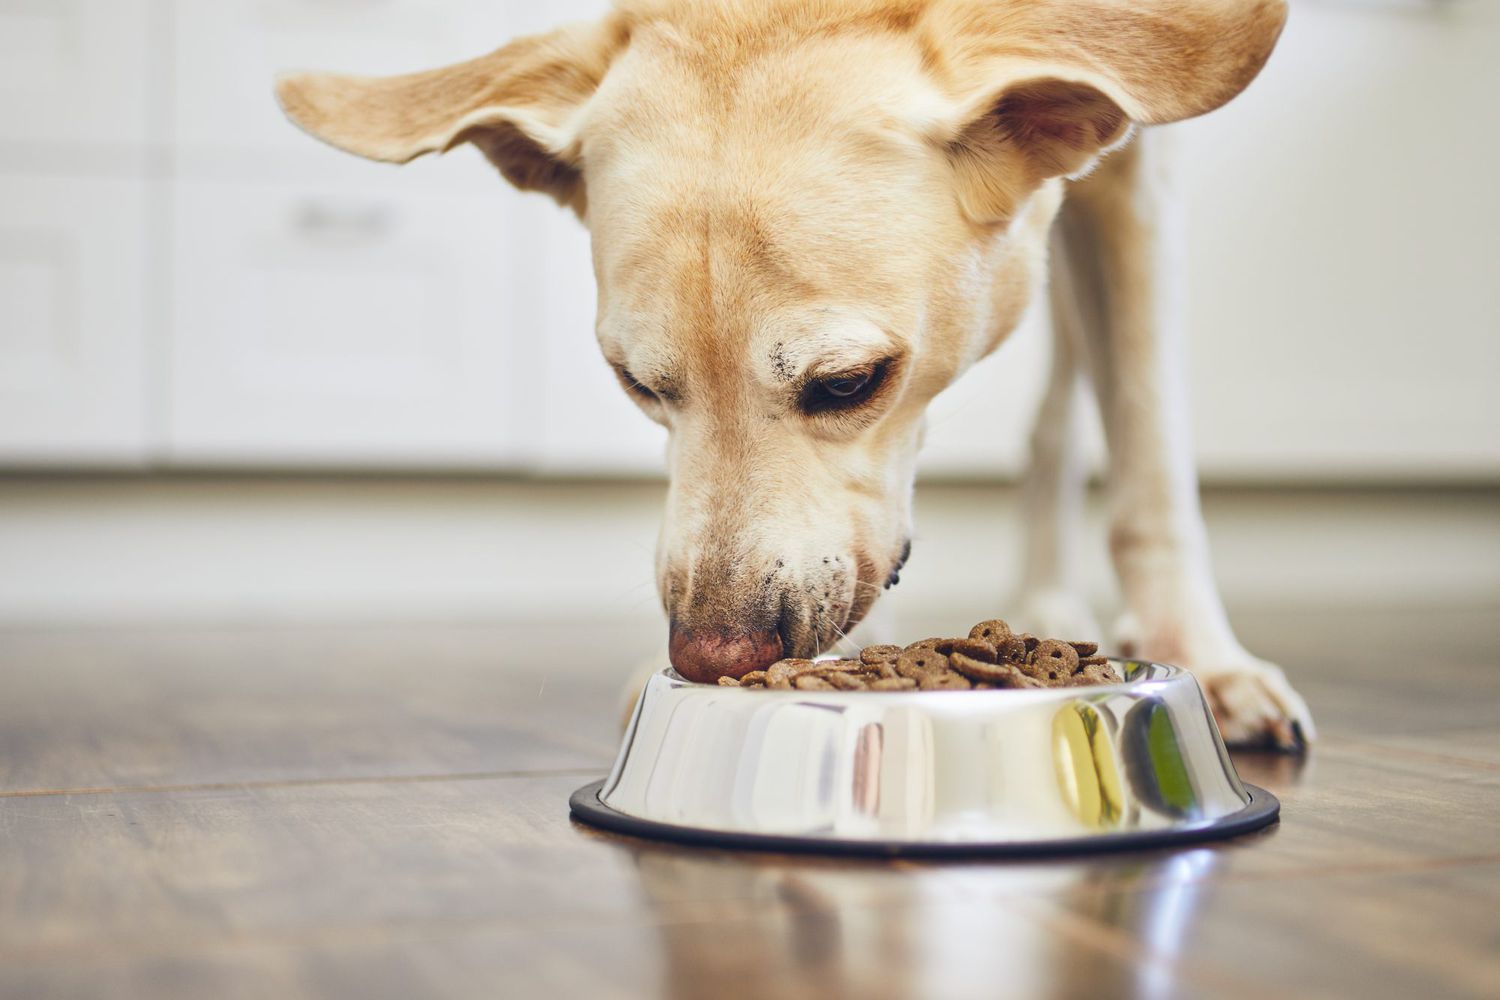 What Is A Safe Dog Food To Feed My Senior Dog